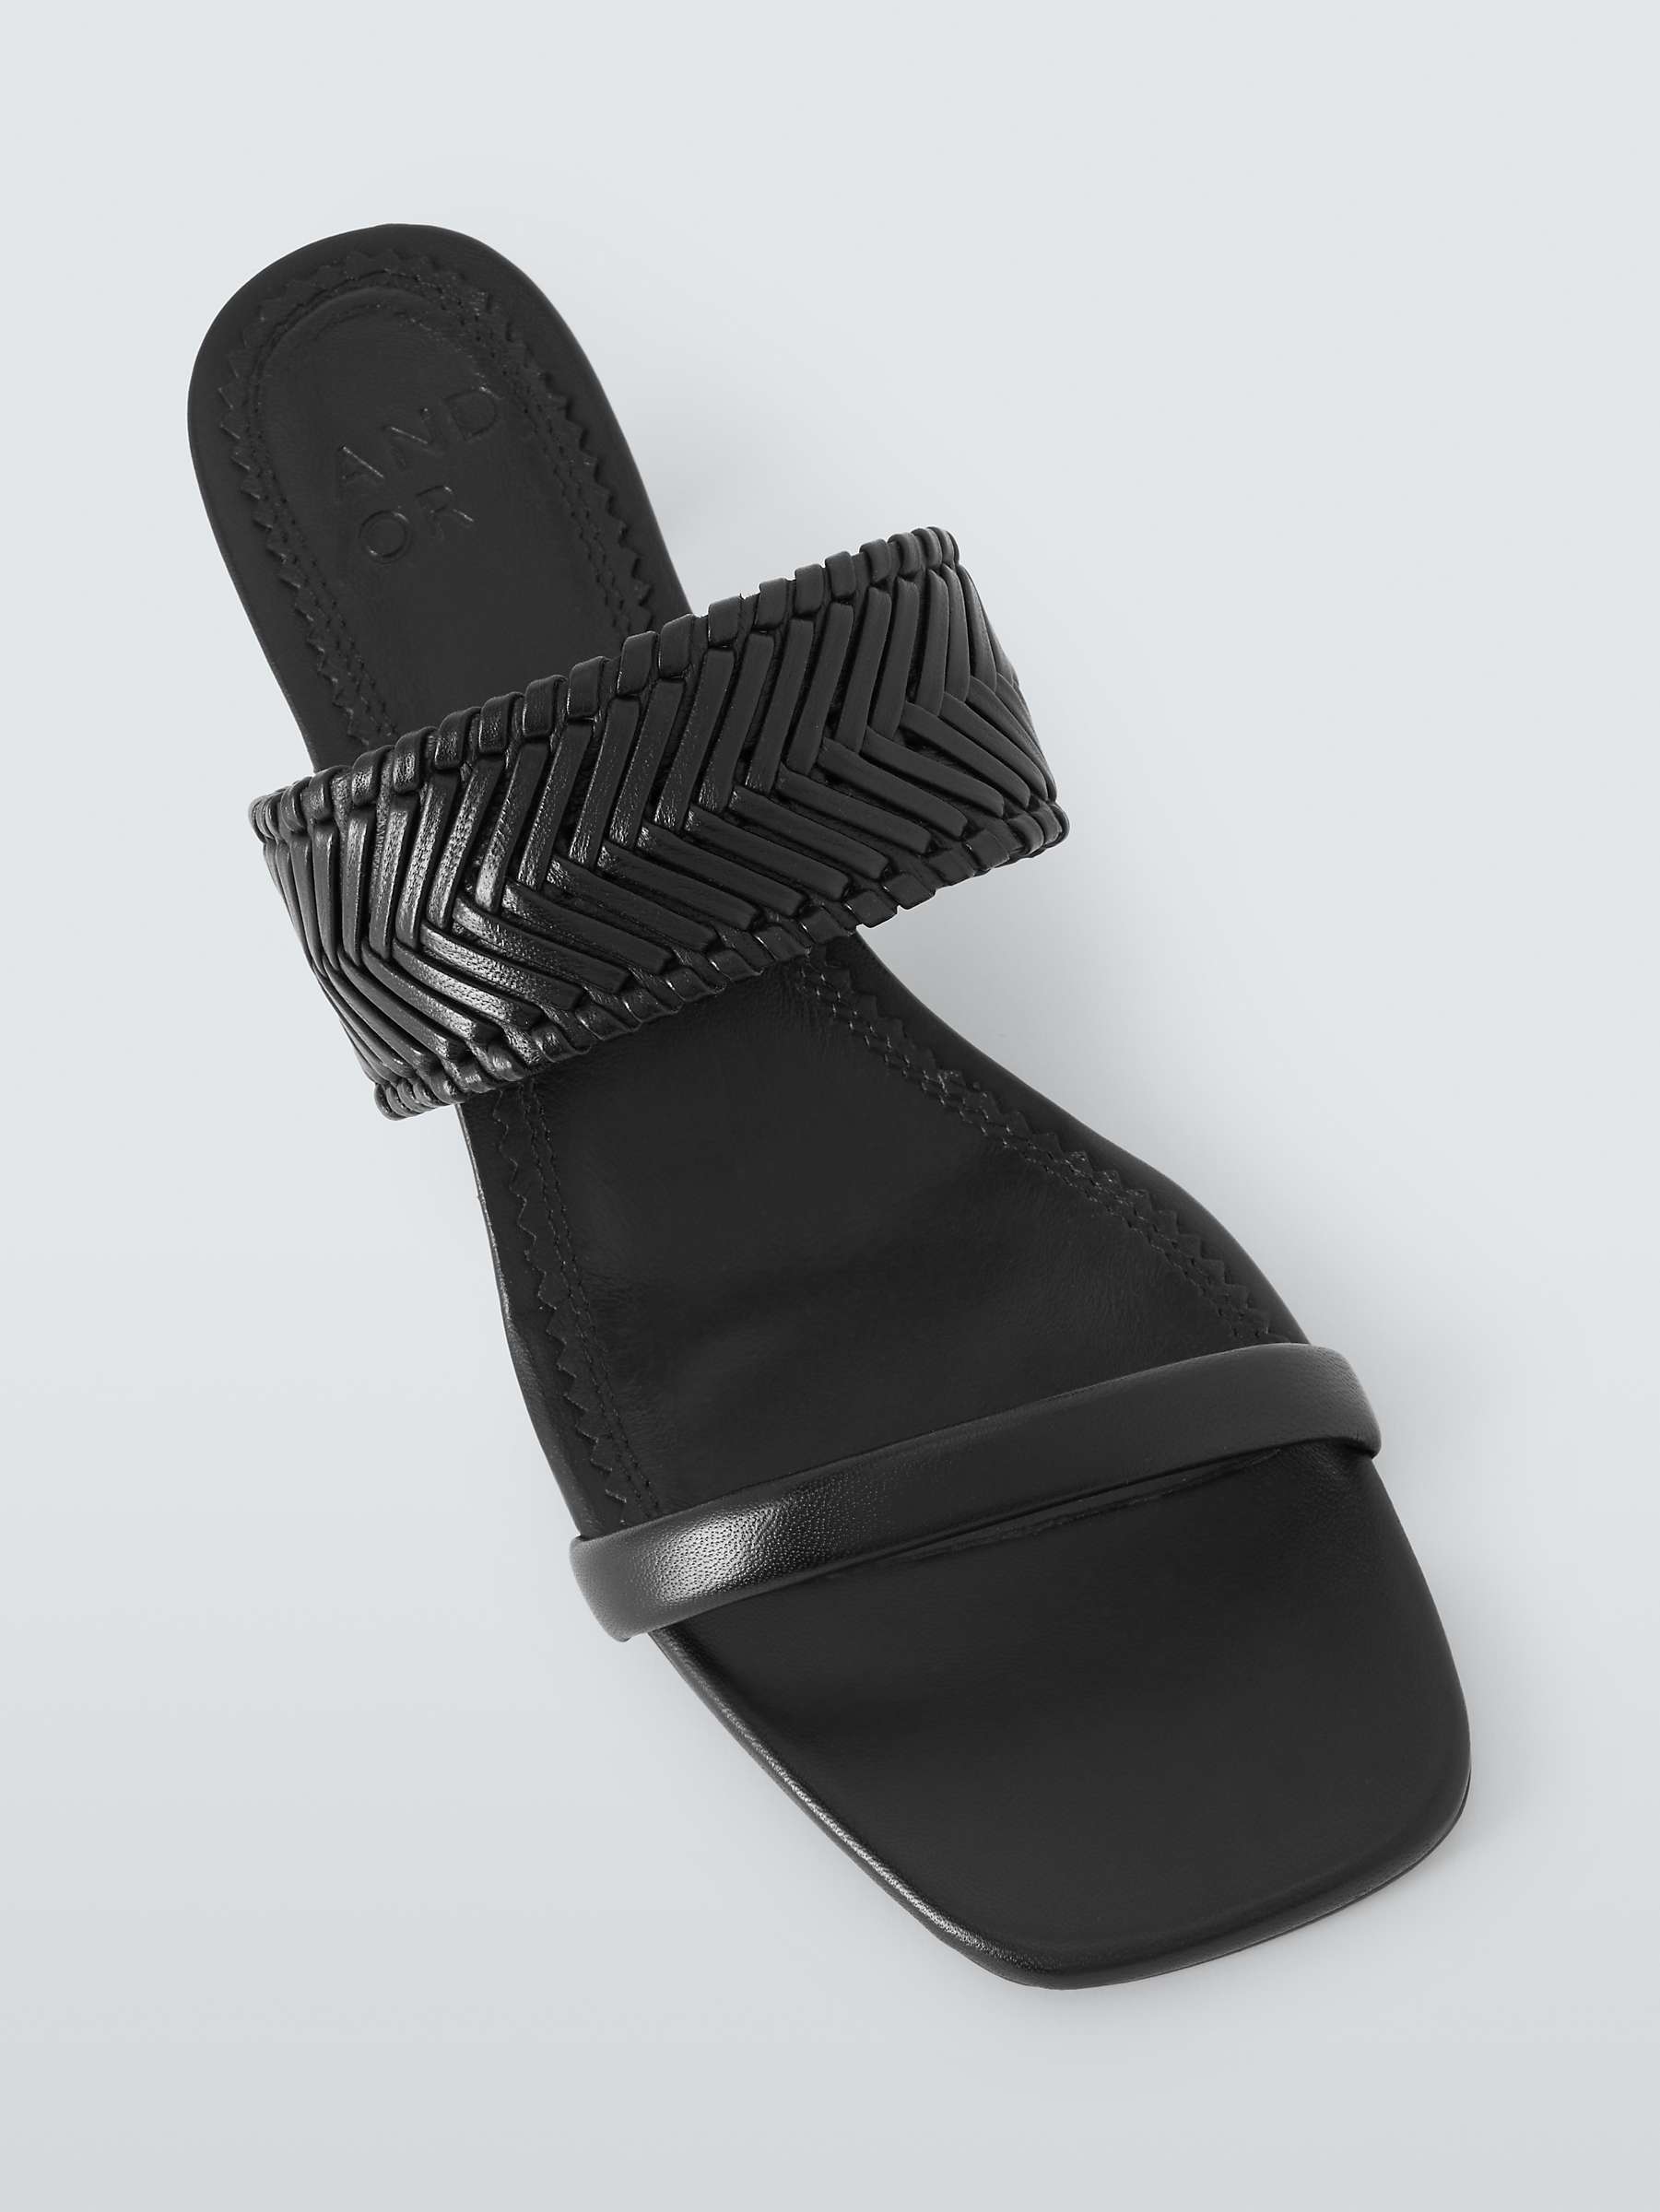 Buy AND/OR Irealea Leather Feature Heel Woven Mule Sandals Online at johnlewis.com